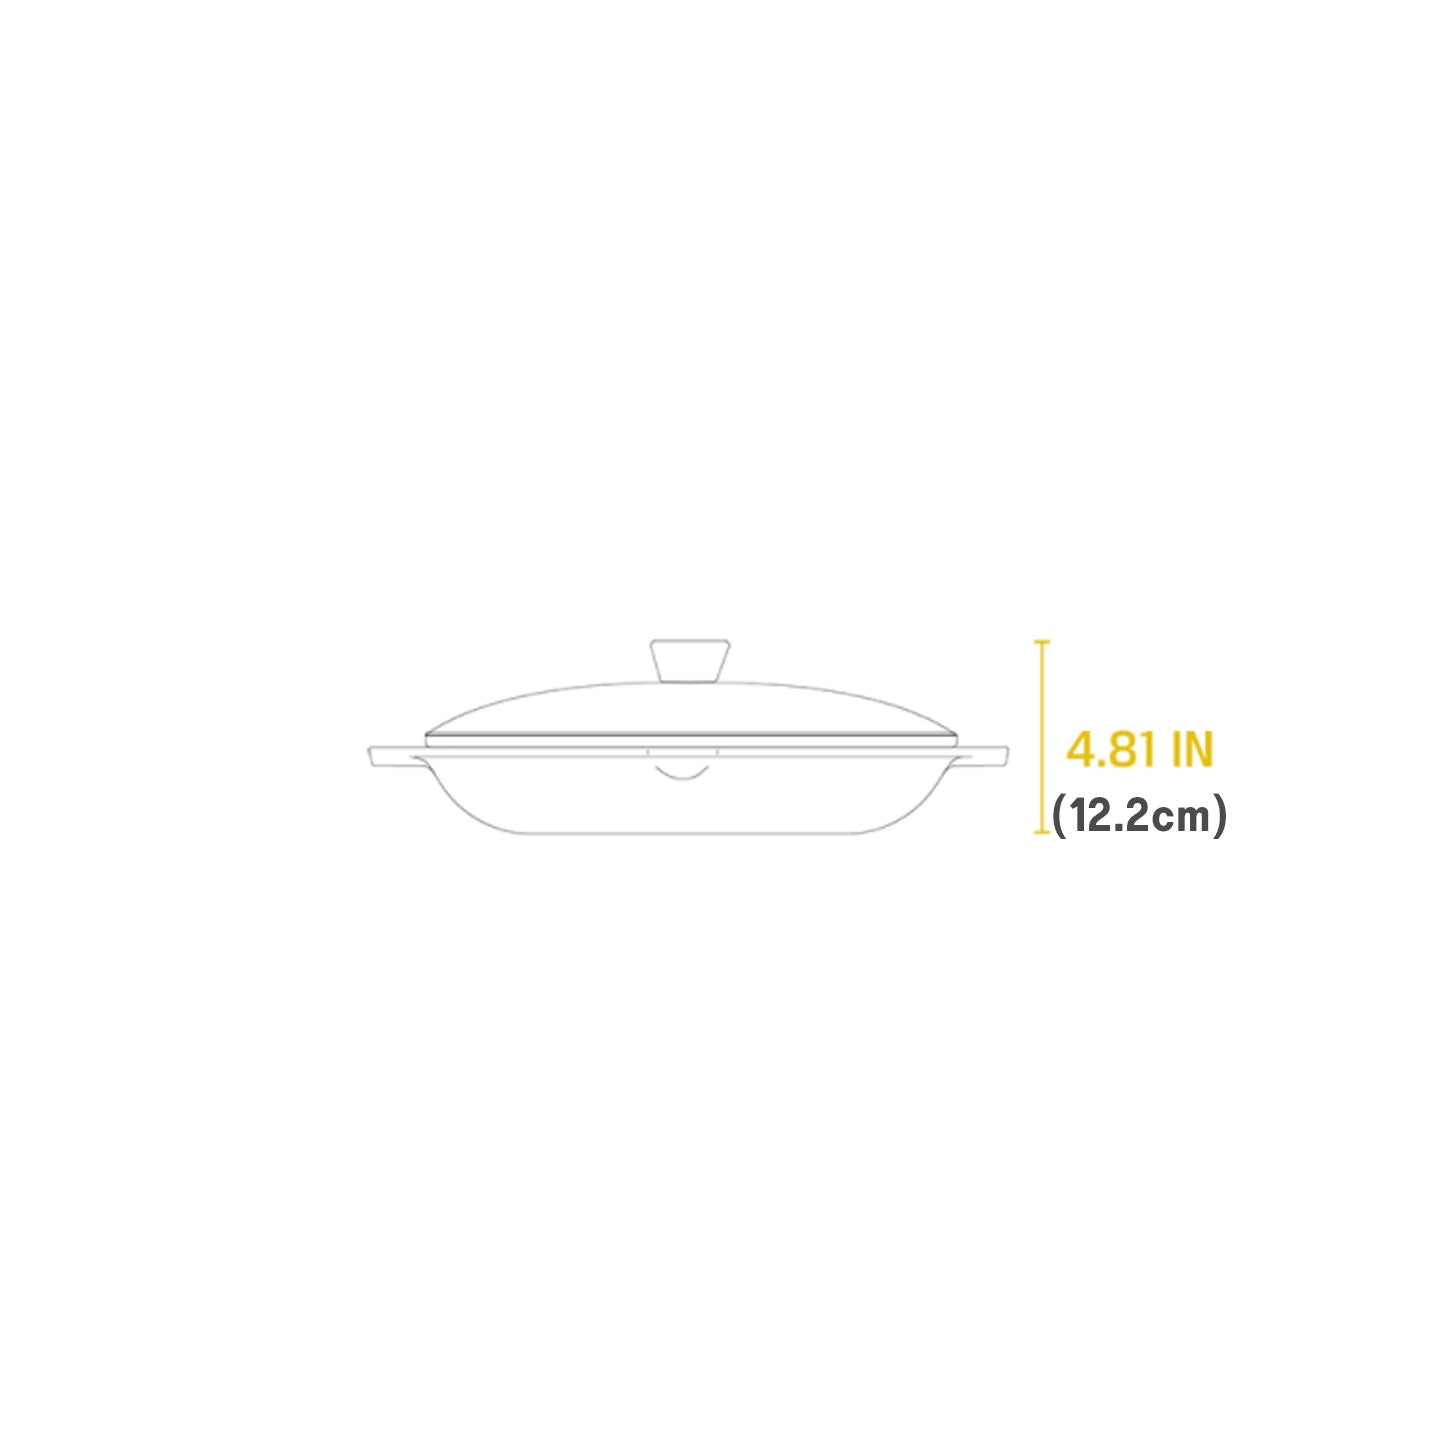 Lodge Chef Collection Chef Pan with Loop Handles and Glass Lid / 30cm / 12" (Online Only)